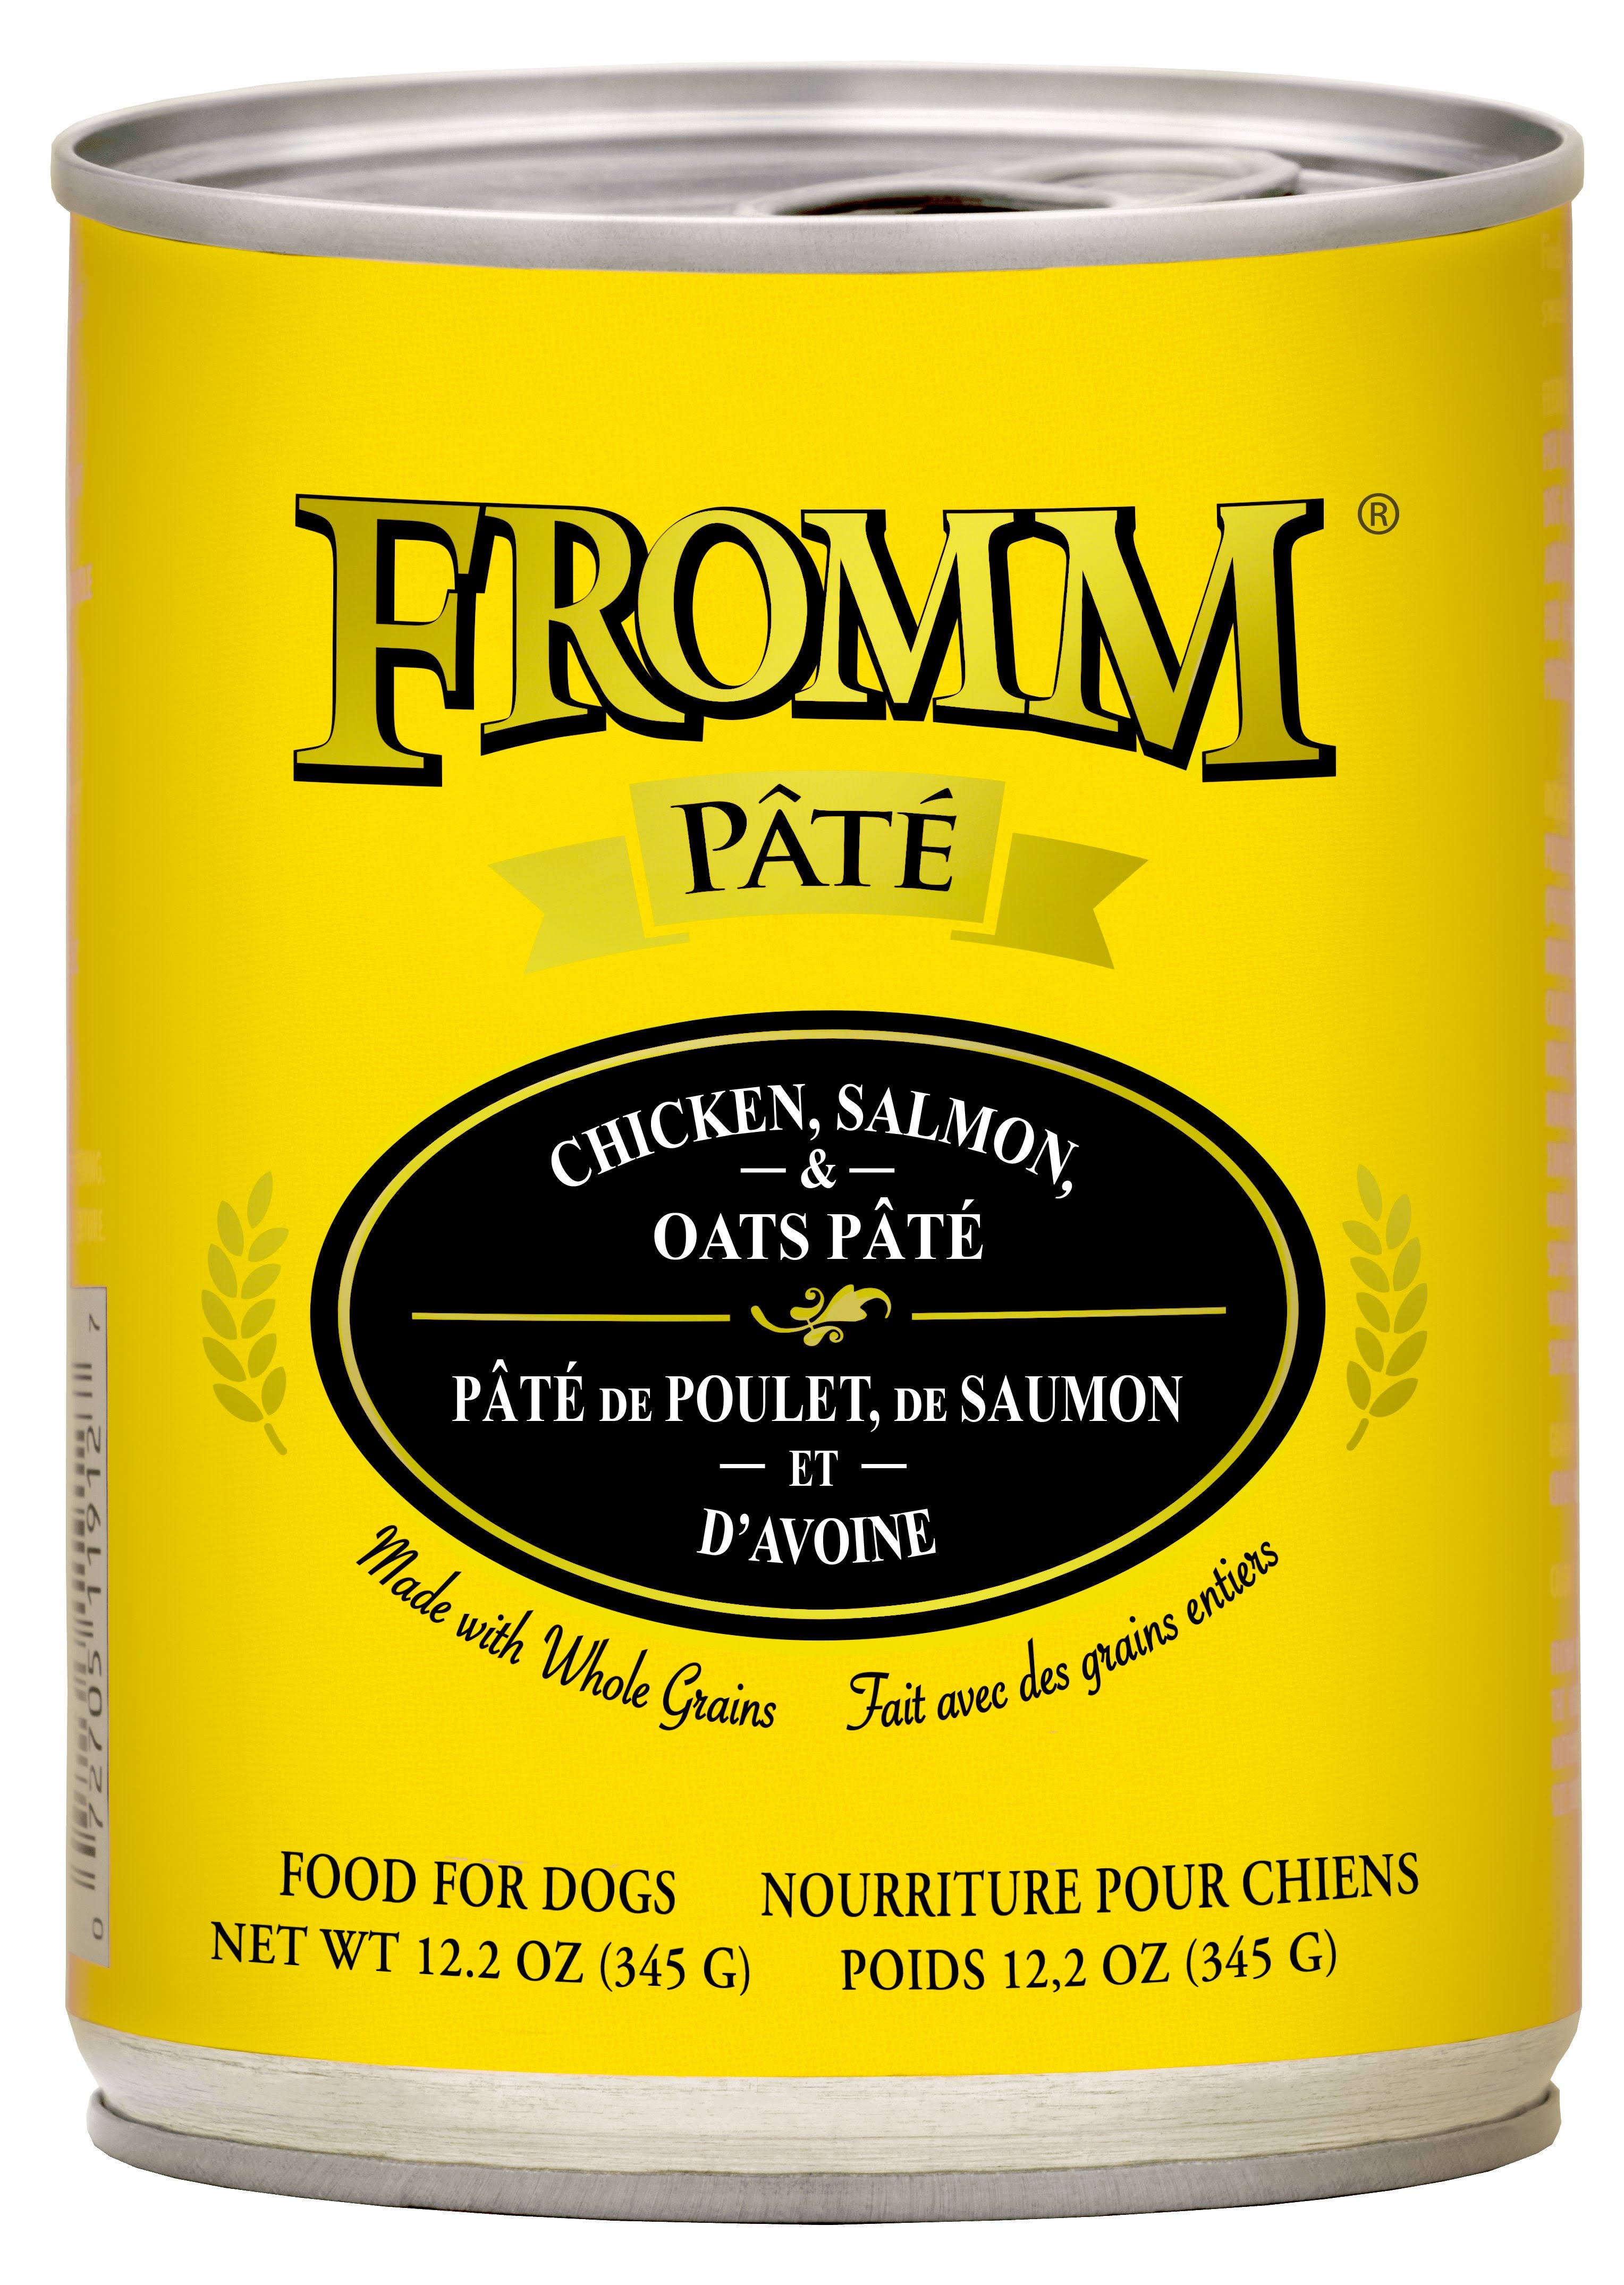 Fromm Chicken, Salmon & Oats Pate Canned Dog Food, 12.2-oz